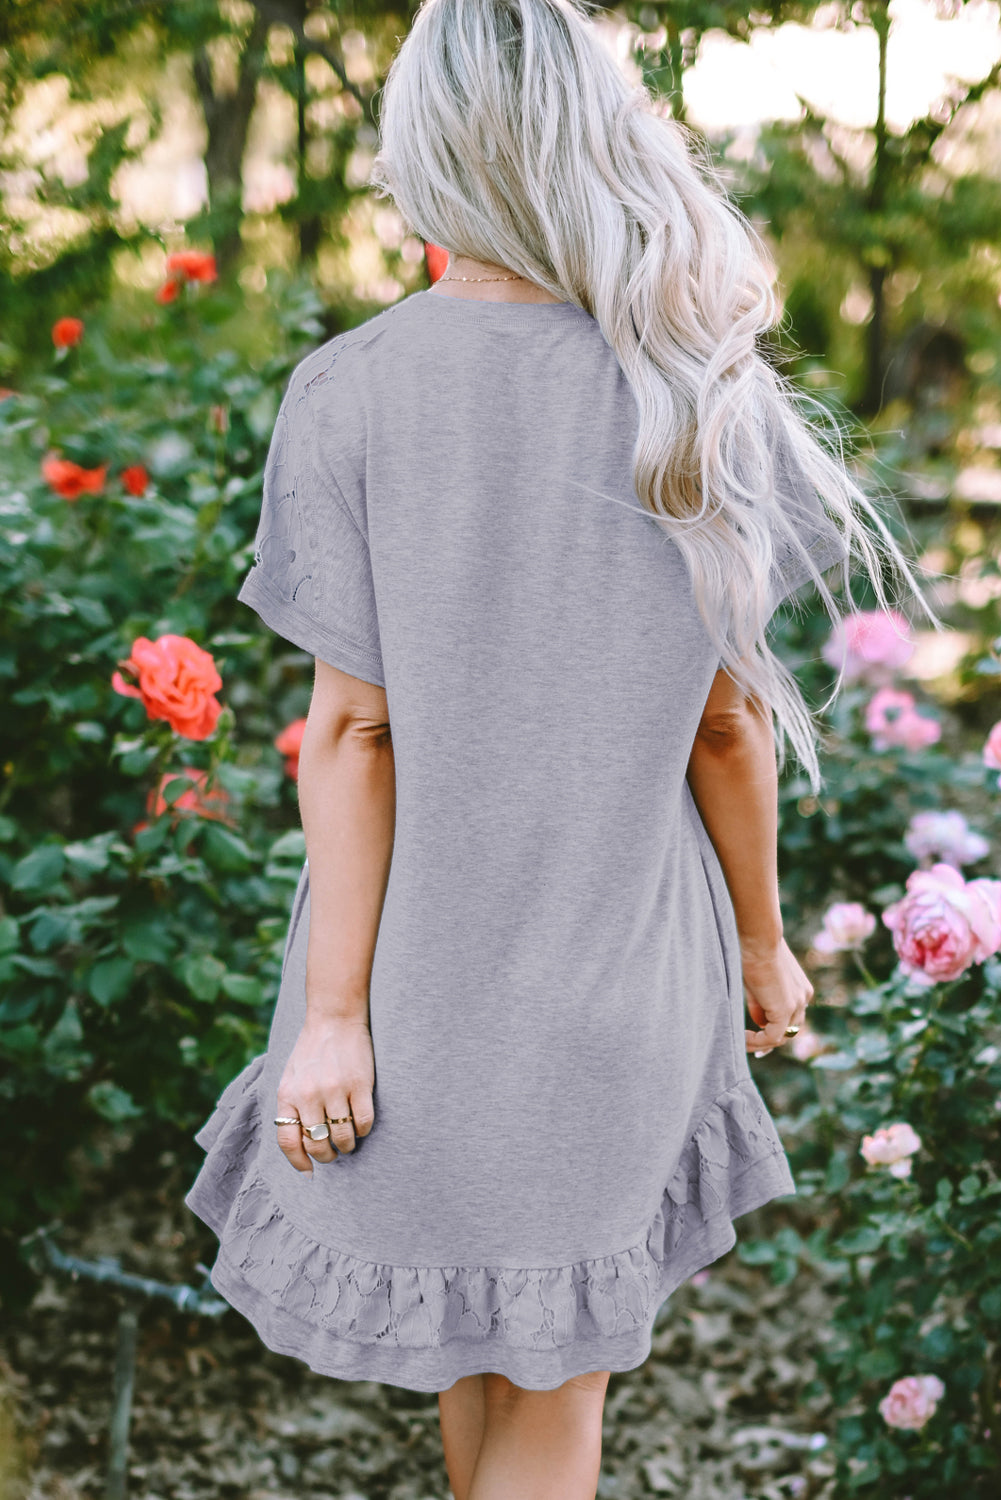 Light Grey Lace Floral Patchwork Ruffled T-shirt Dress